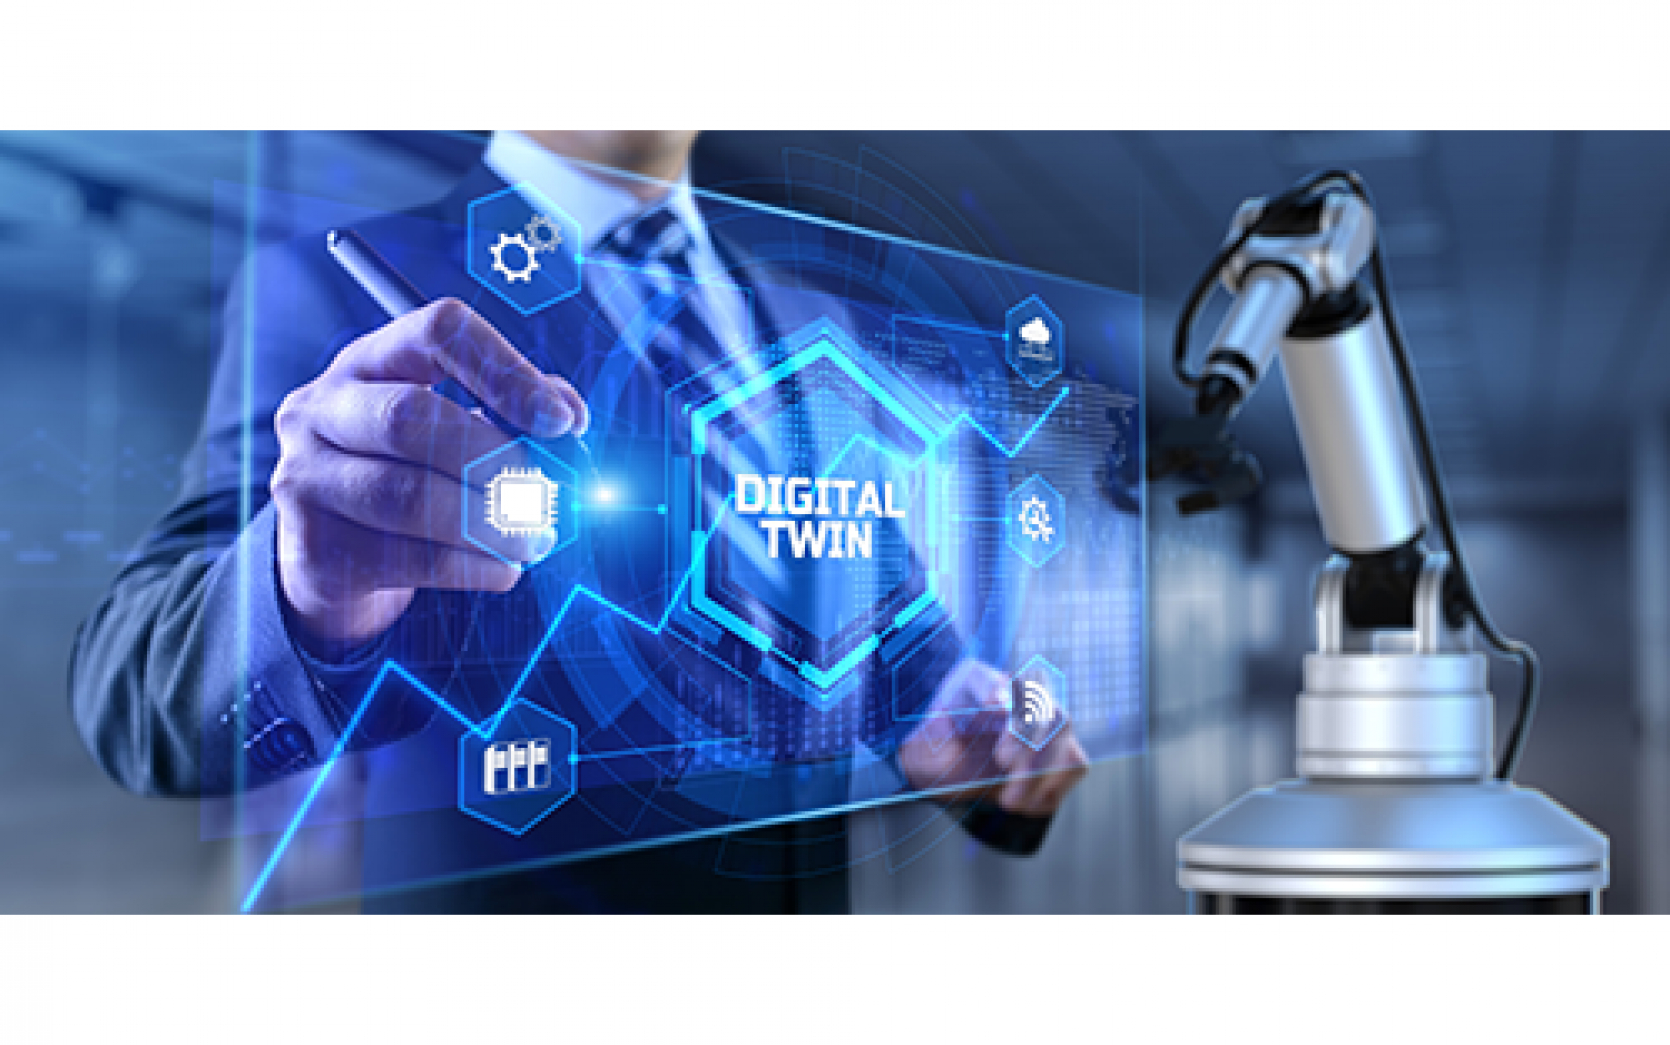 IMPLEMENTING DIGITAL TWINS FOR DISCRETE MANUFACTURING